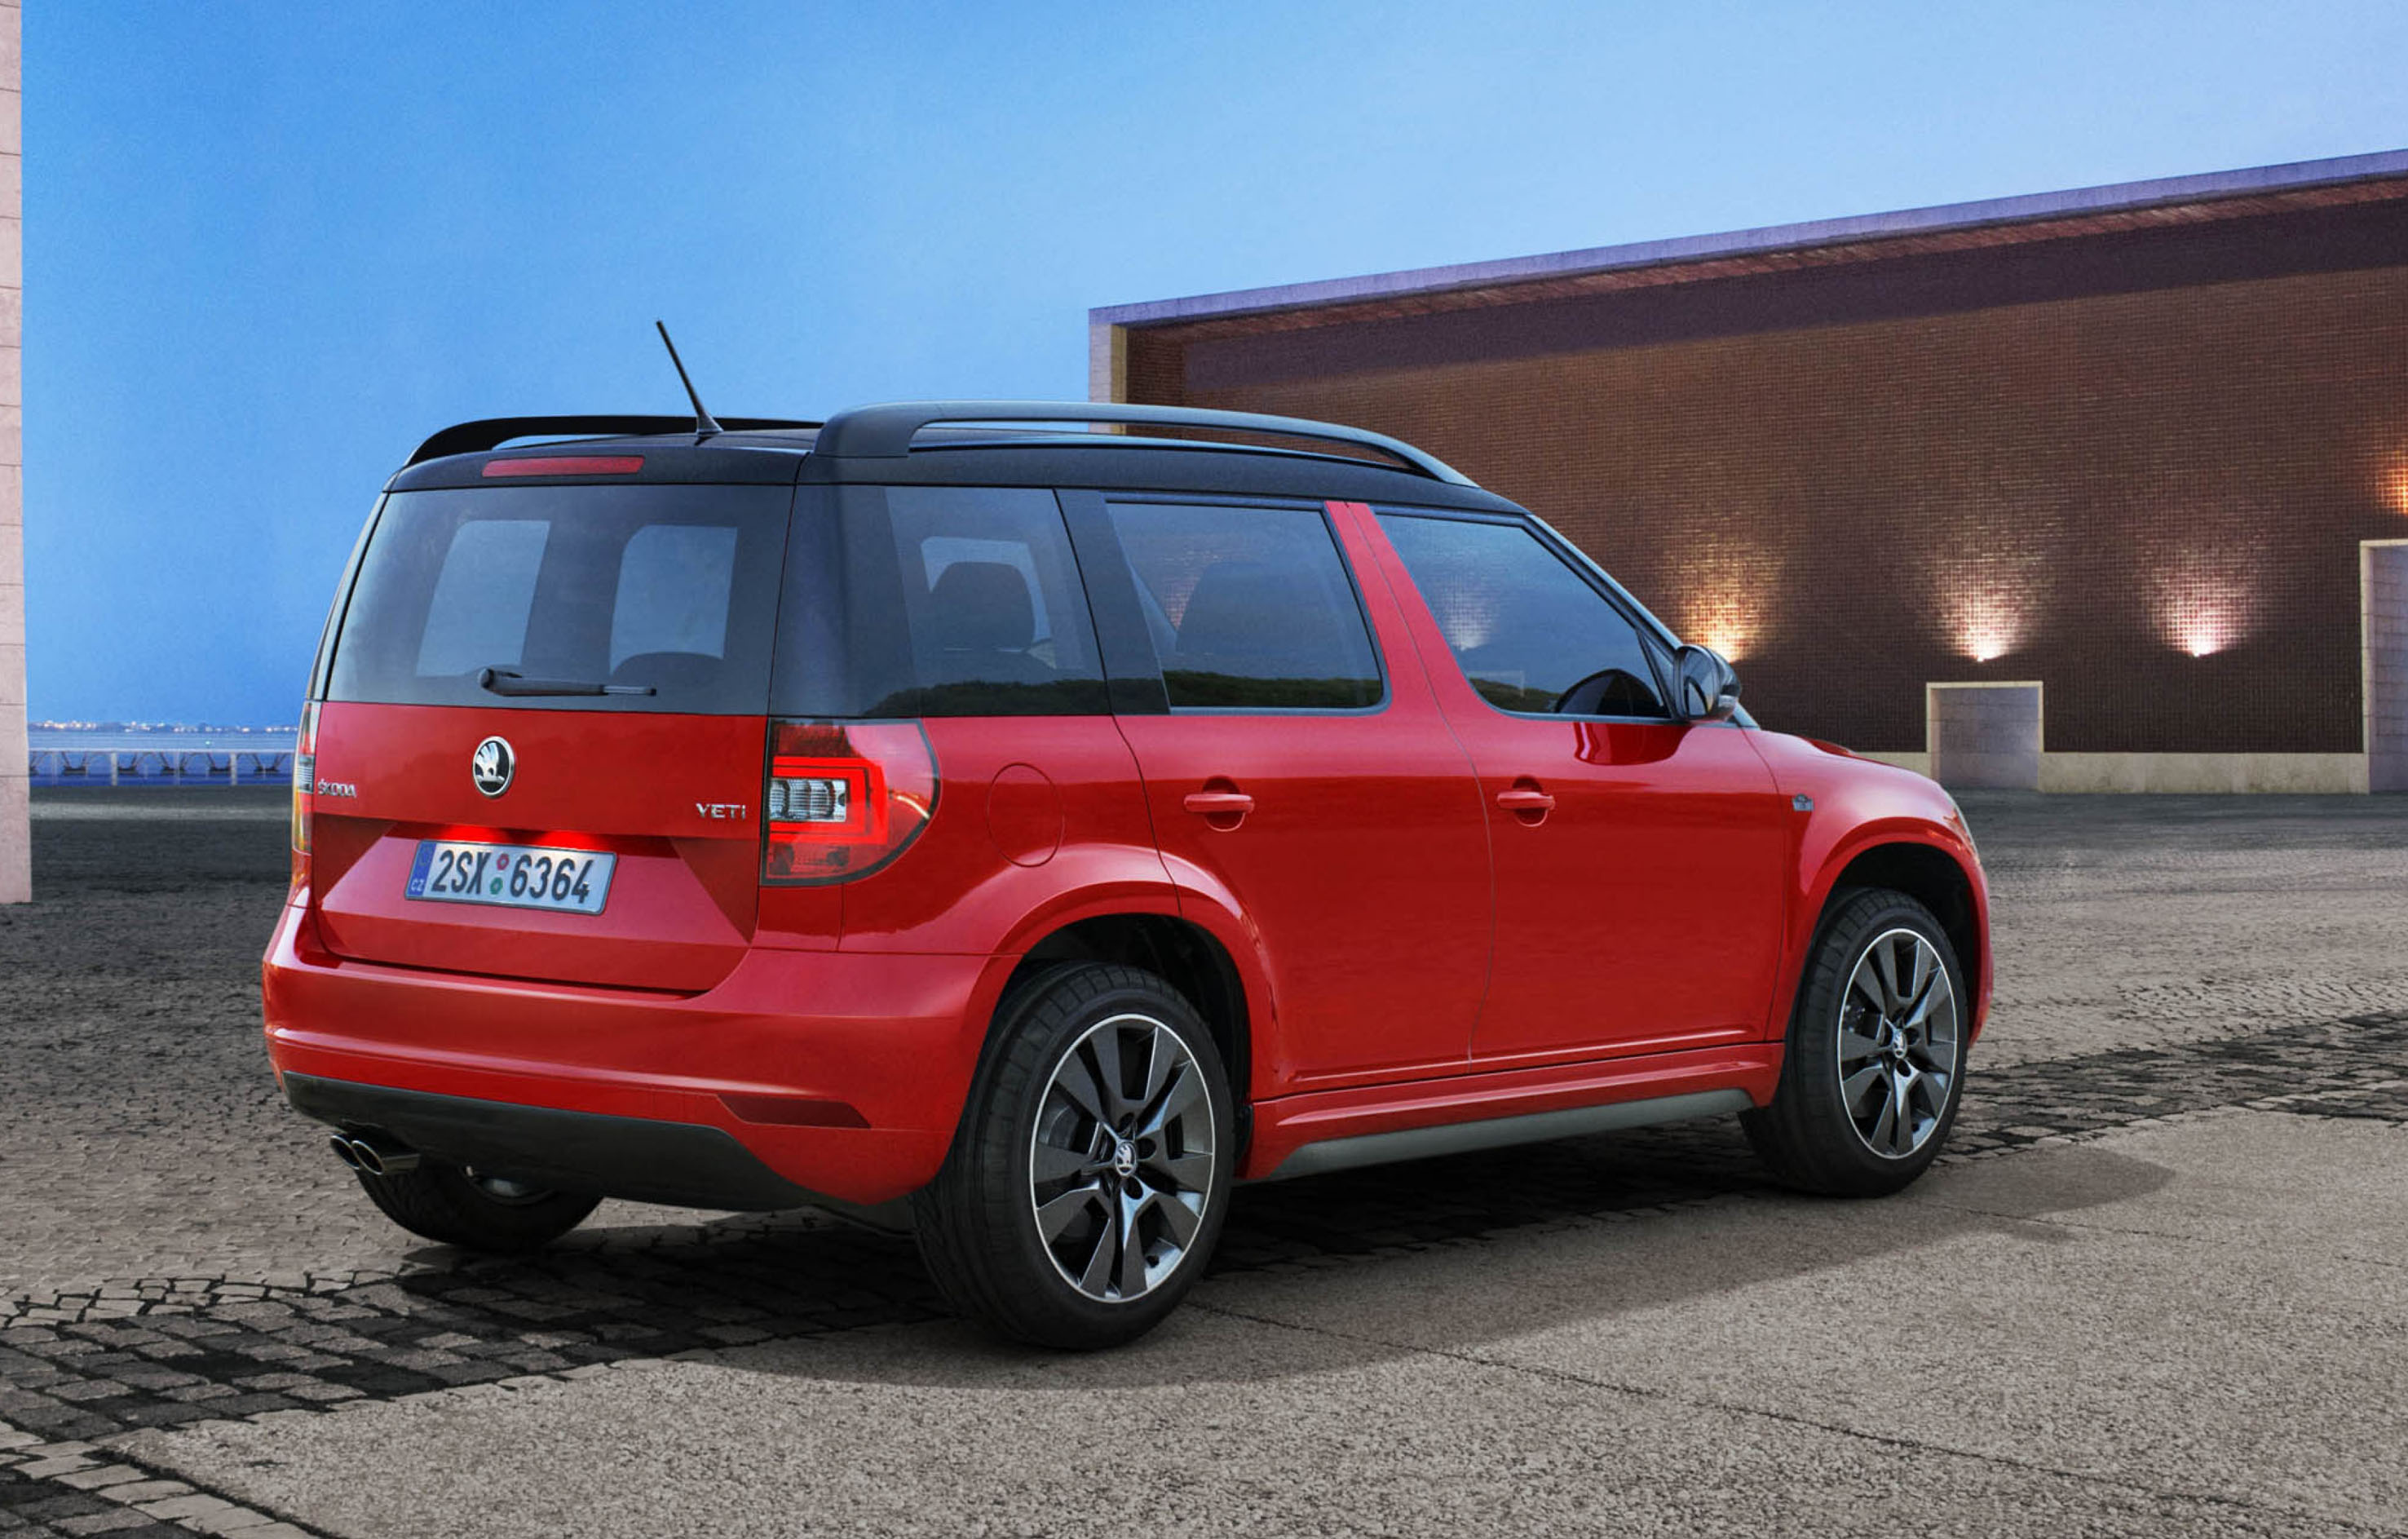 Skoda Yeti has new variants added - First Vehicle Leasing Car Reviews 2024